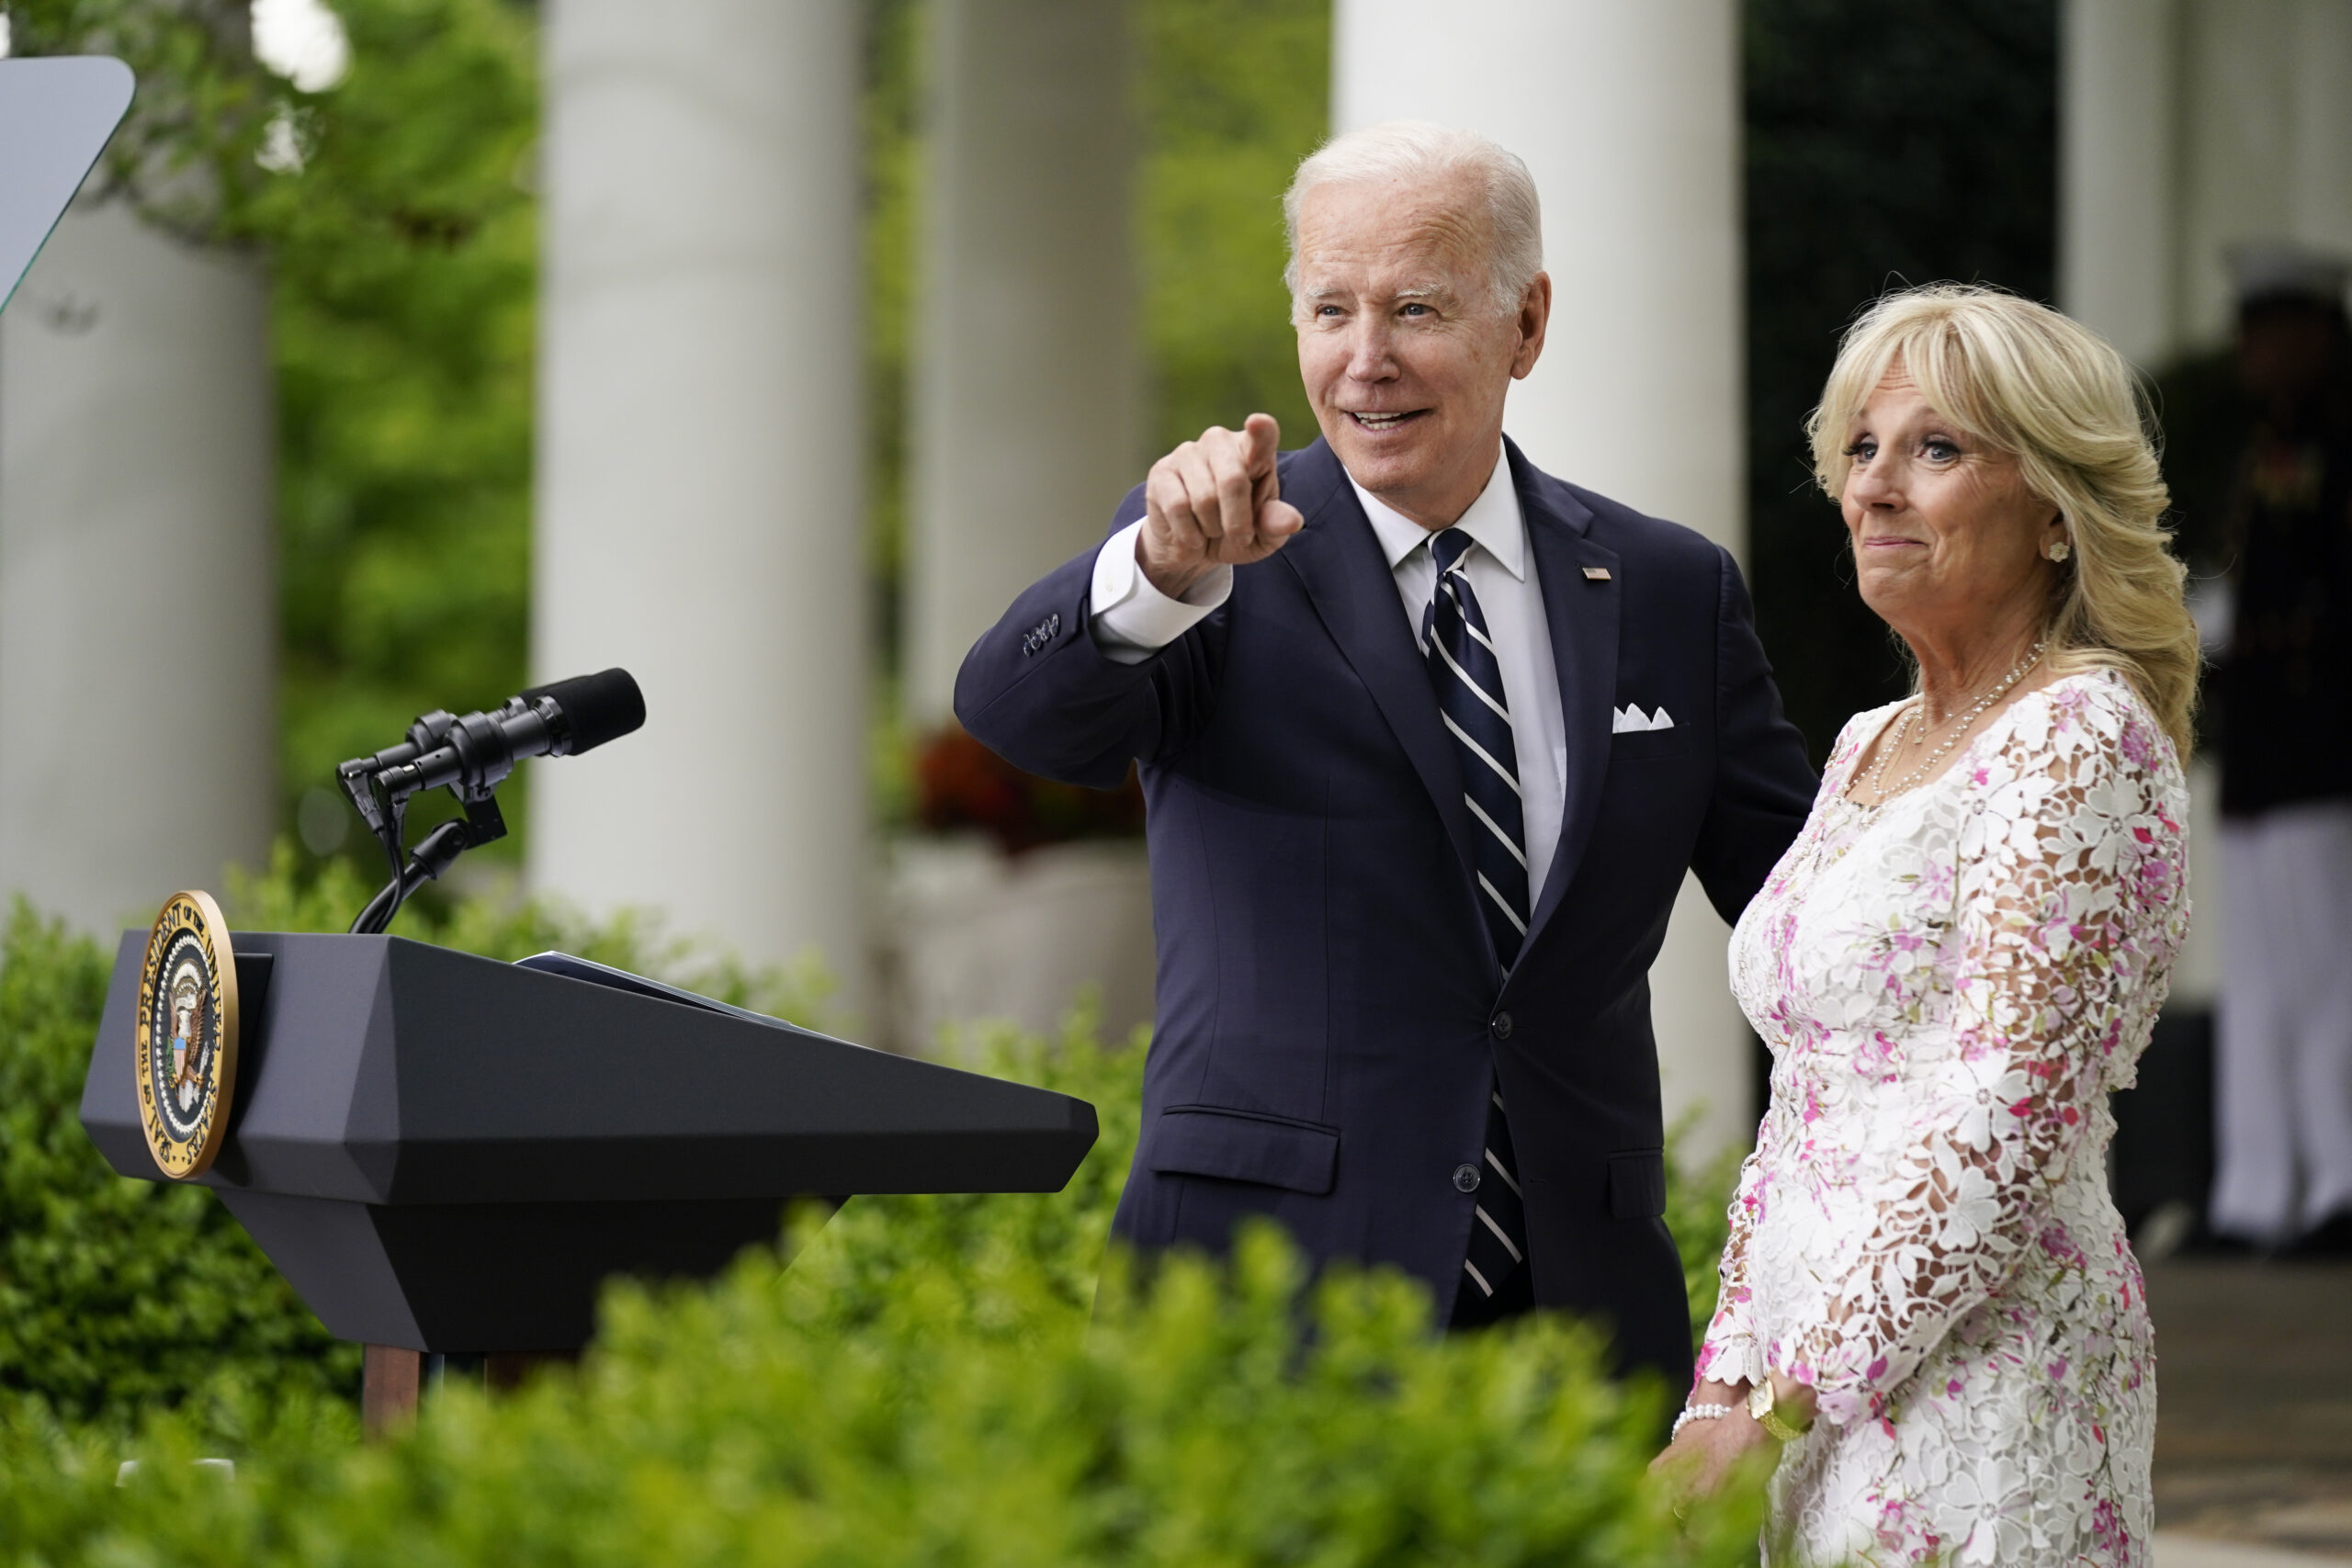 FILE - President Joe Biden points to Mexico's first lady Beatriz Gutierrez Muller as first lady Jill Biden watches as he speaks during a Cinco de Mayo event in the Rose Garden of the White House, May 5, 2022, in Washington. Jill Biden says she and the president don't hash out disagreements in front of other people, but argue instead by text. “Fexting” is what they call it. The first lady has revealed that and more in a new interview in the June-July issue of Harper's Bazaar. (AP Photo/Evan Vucci, File)